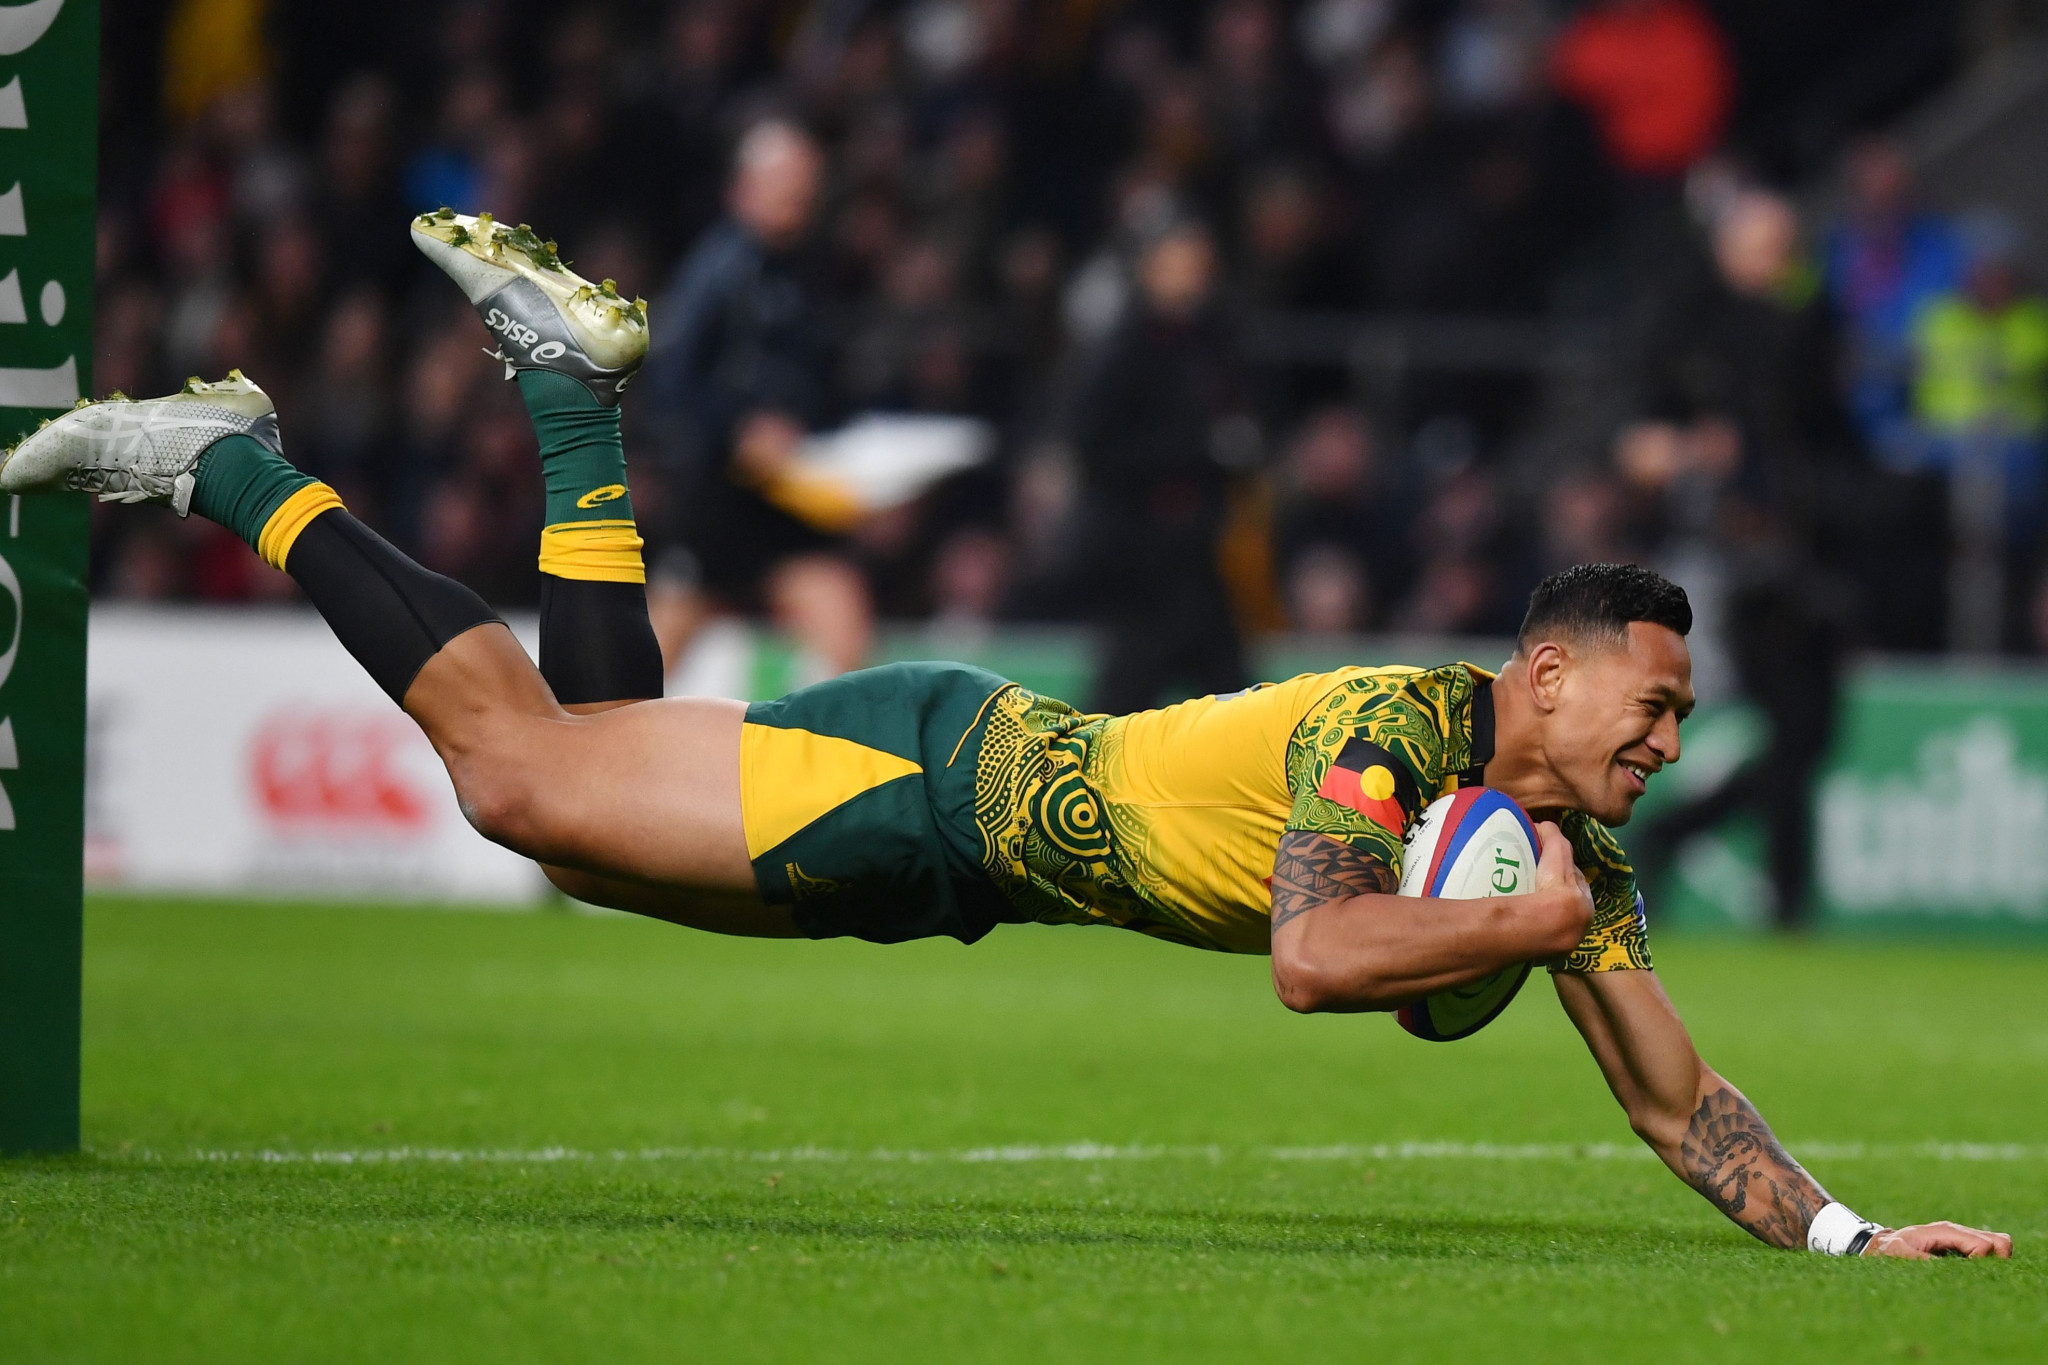 Israel Folau has signed for Catalans Dragons after being sacked by Rugby Australia ©Getty Images